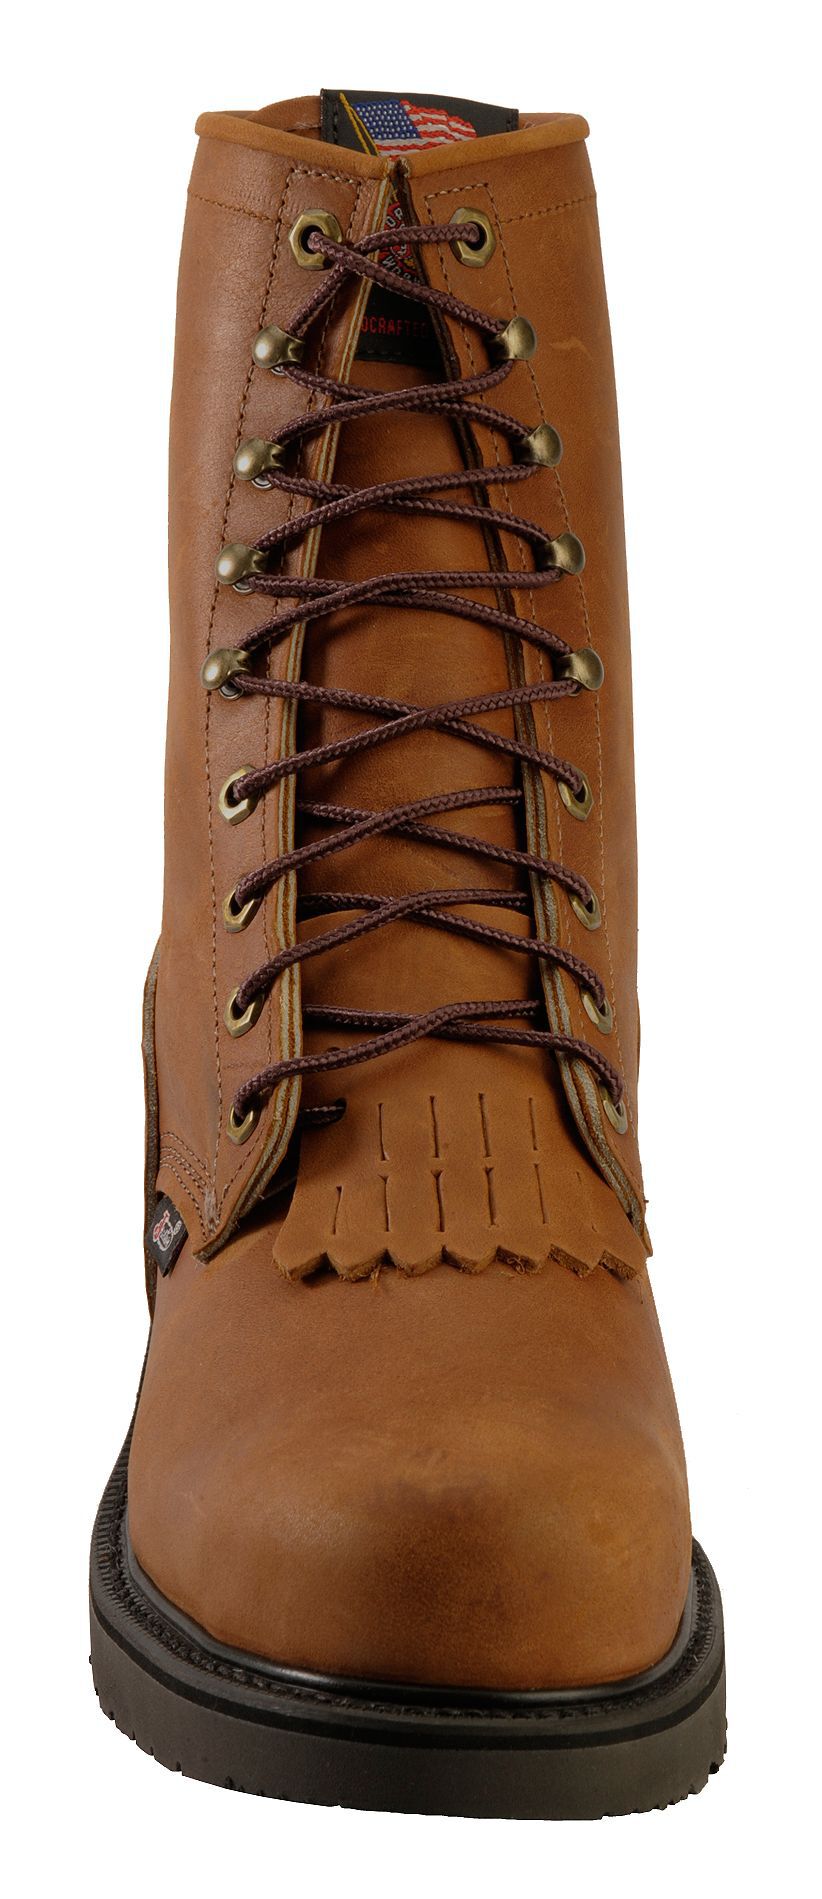 justin work boots steel toe lace up